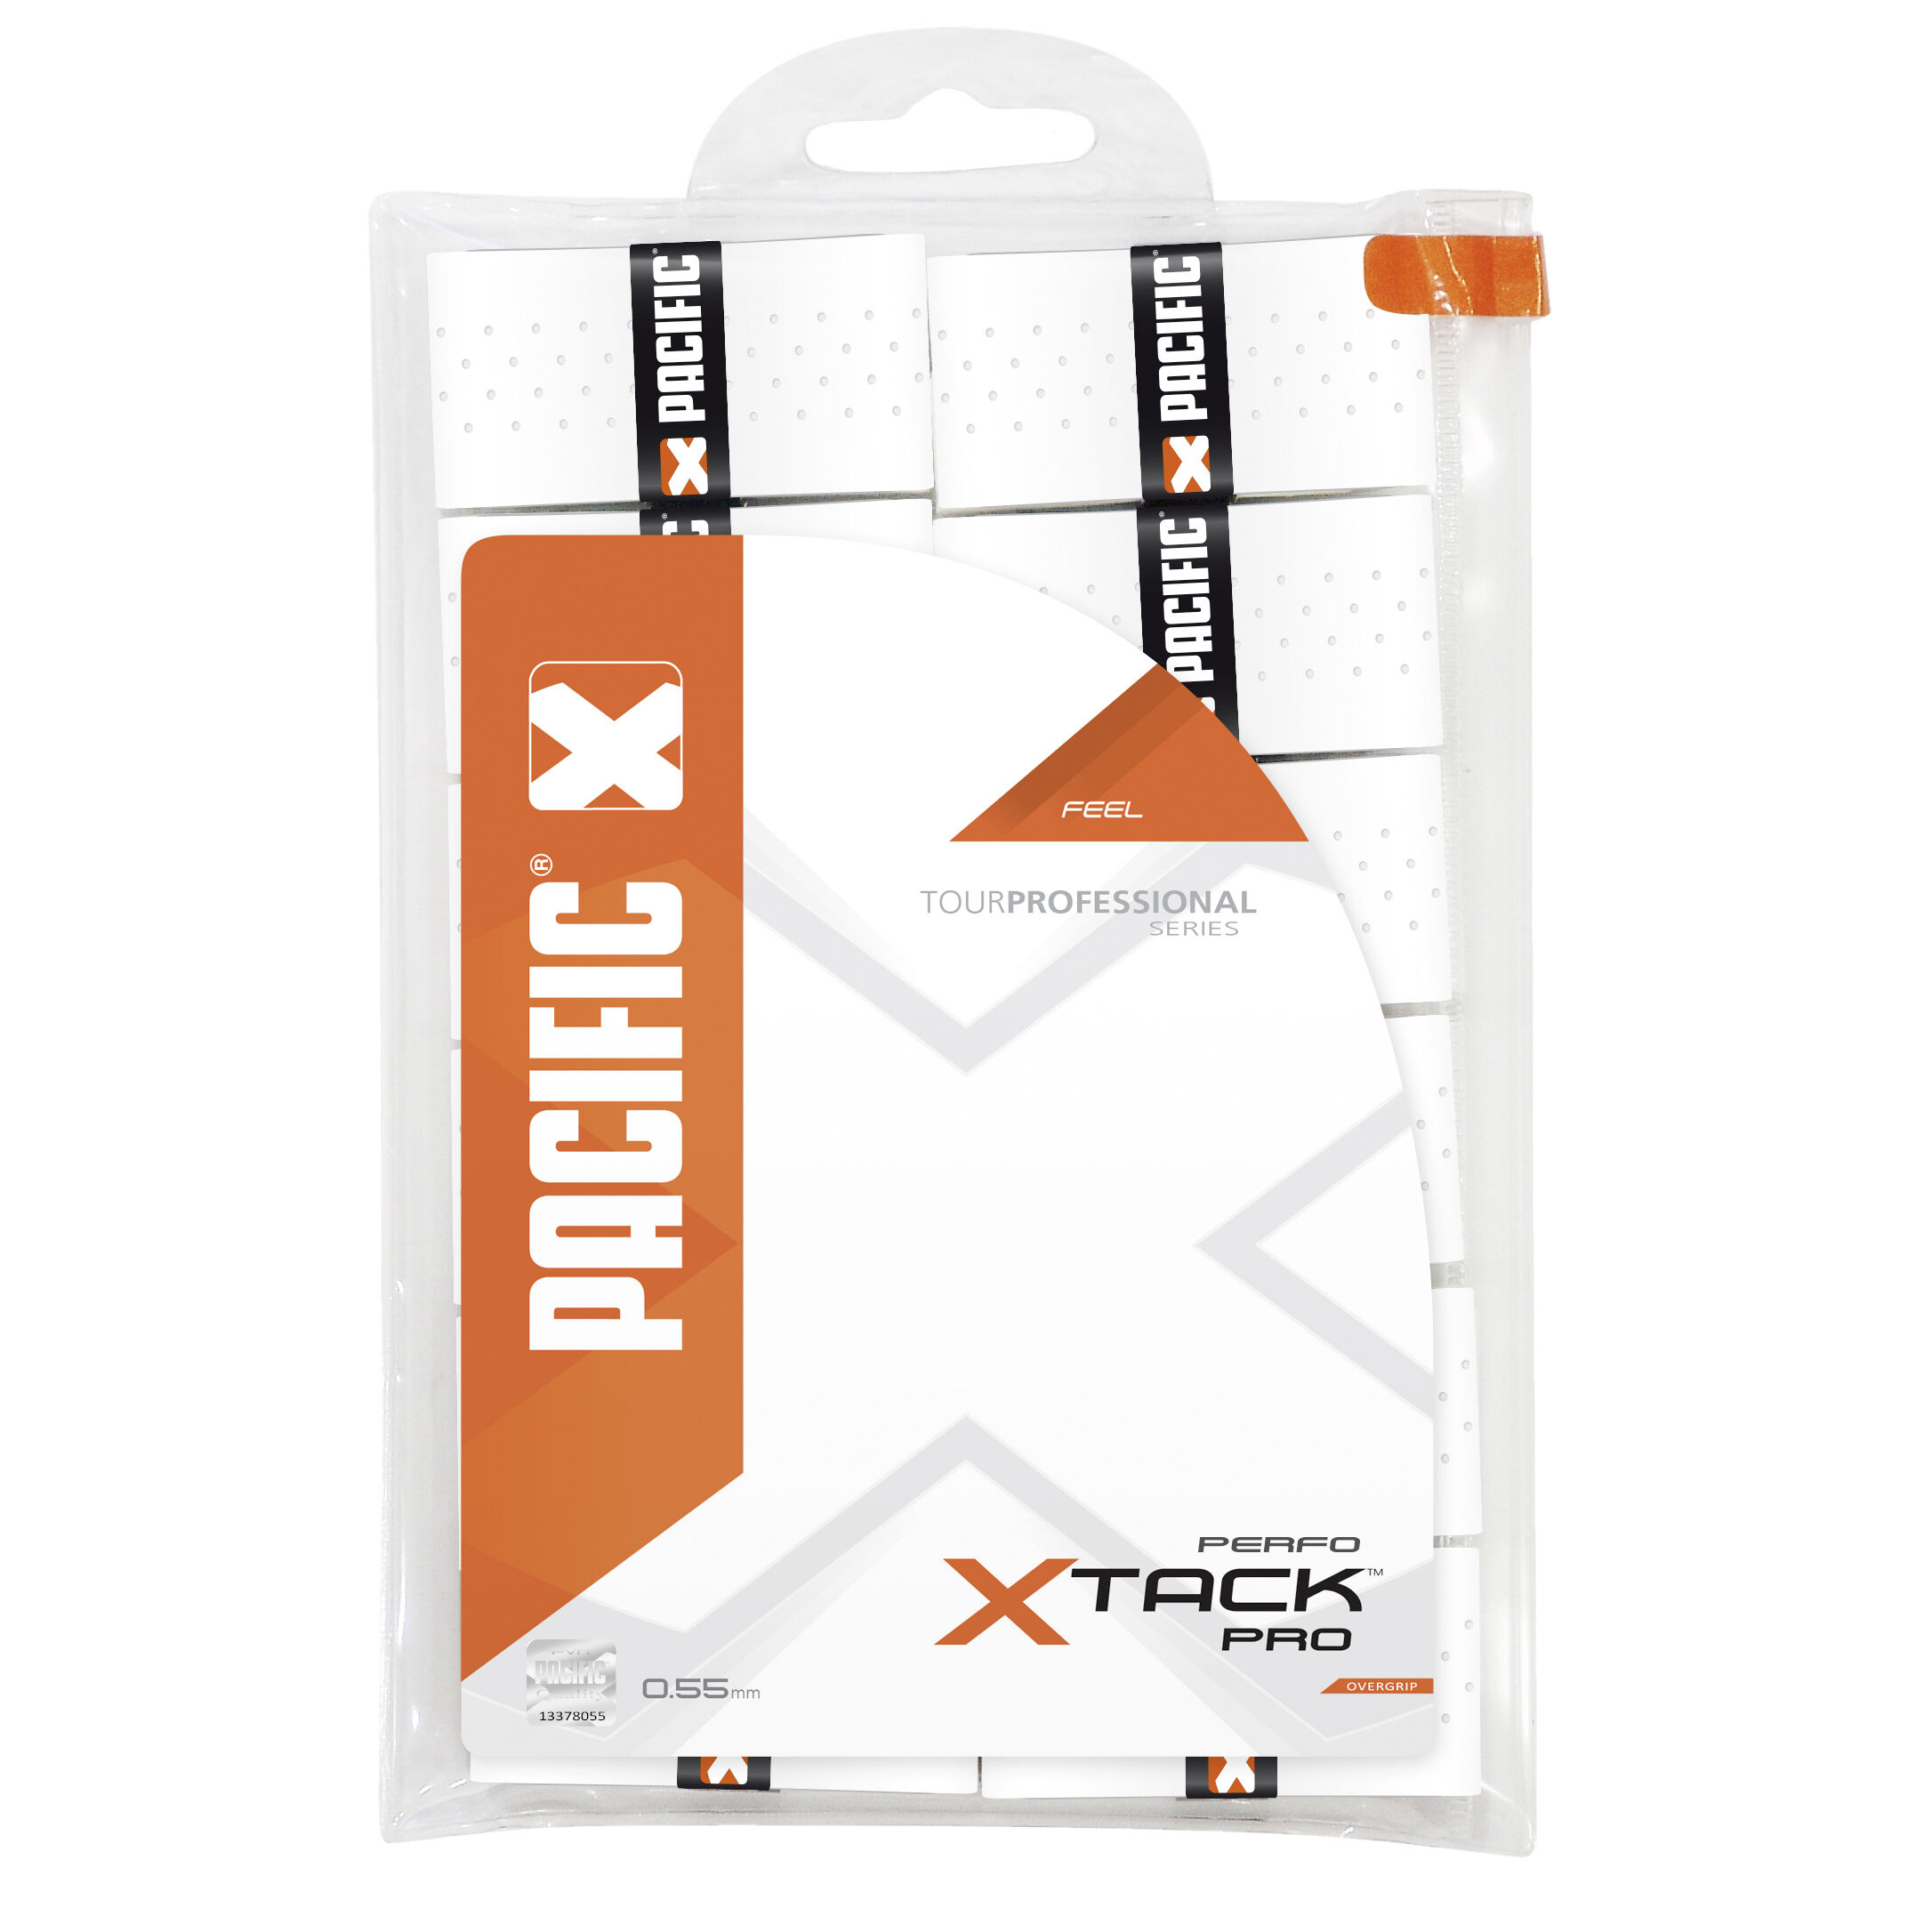 Griffband 3er Pack Pacific X Tack Pro orange Overgrip Xtack Pro